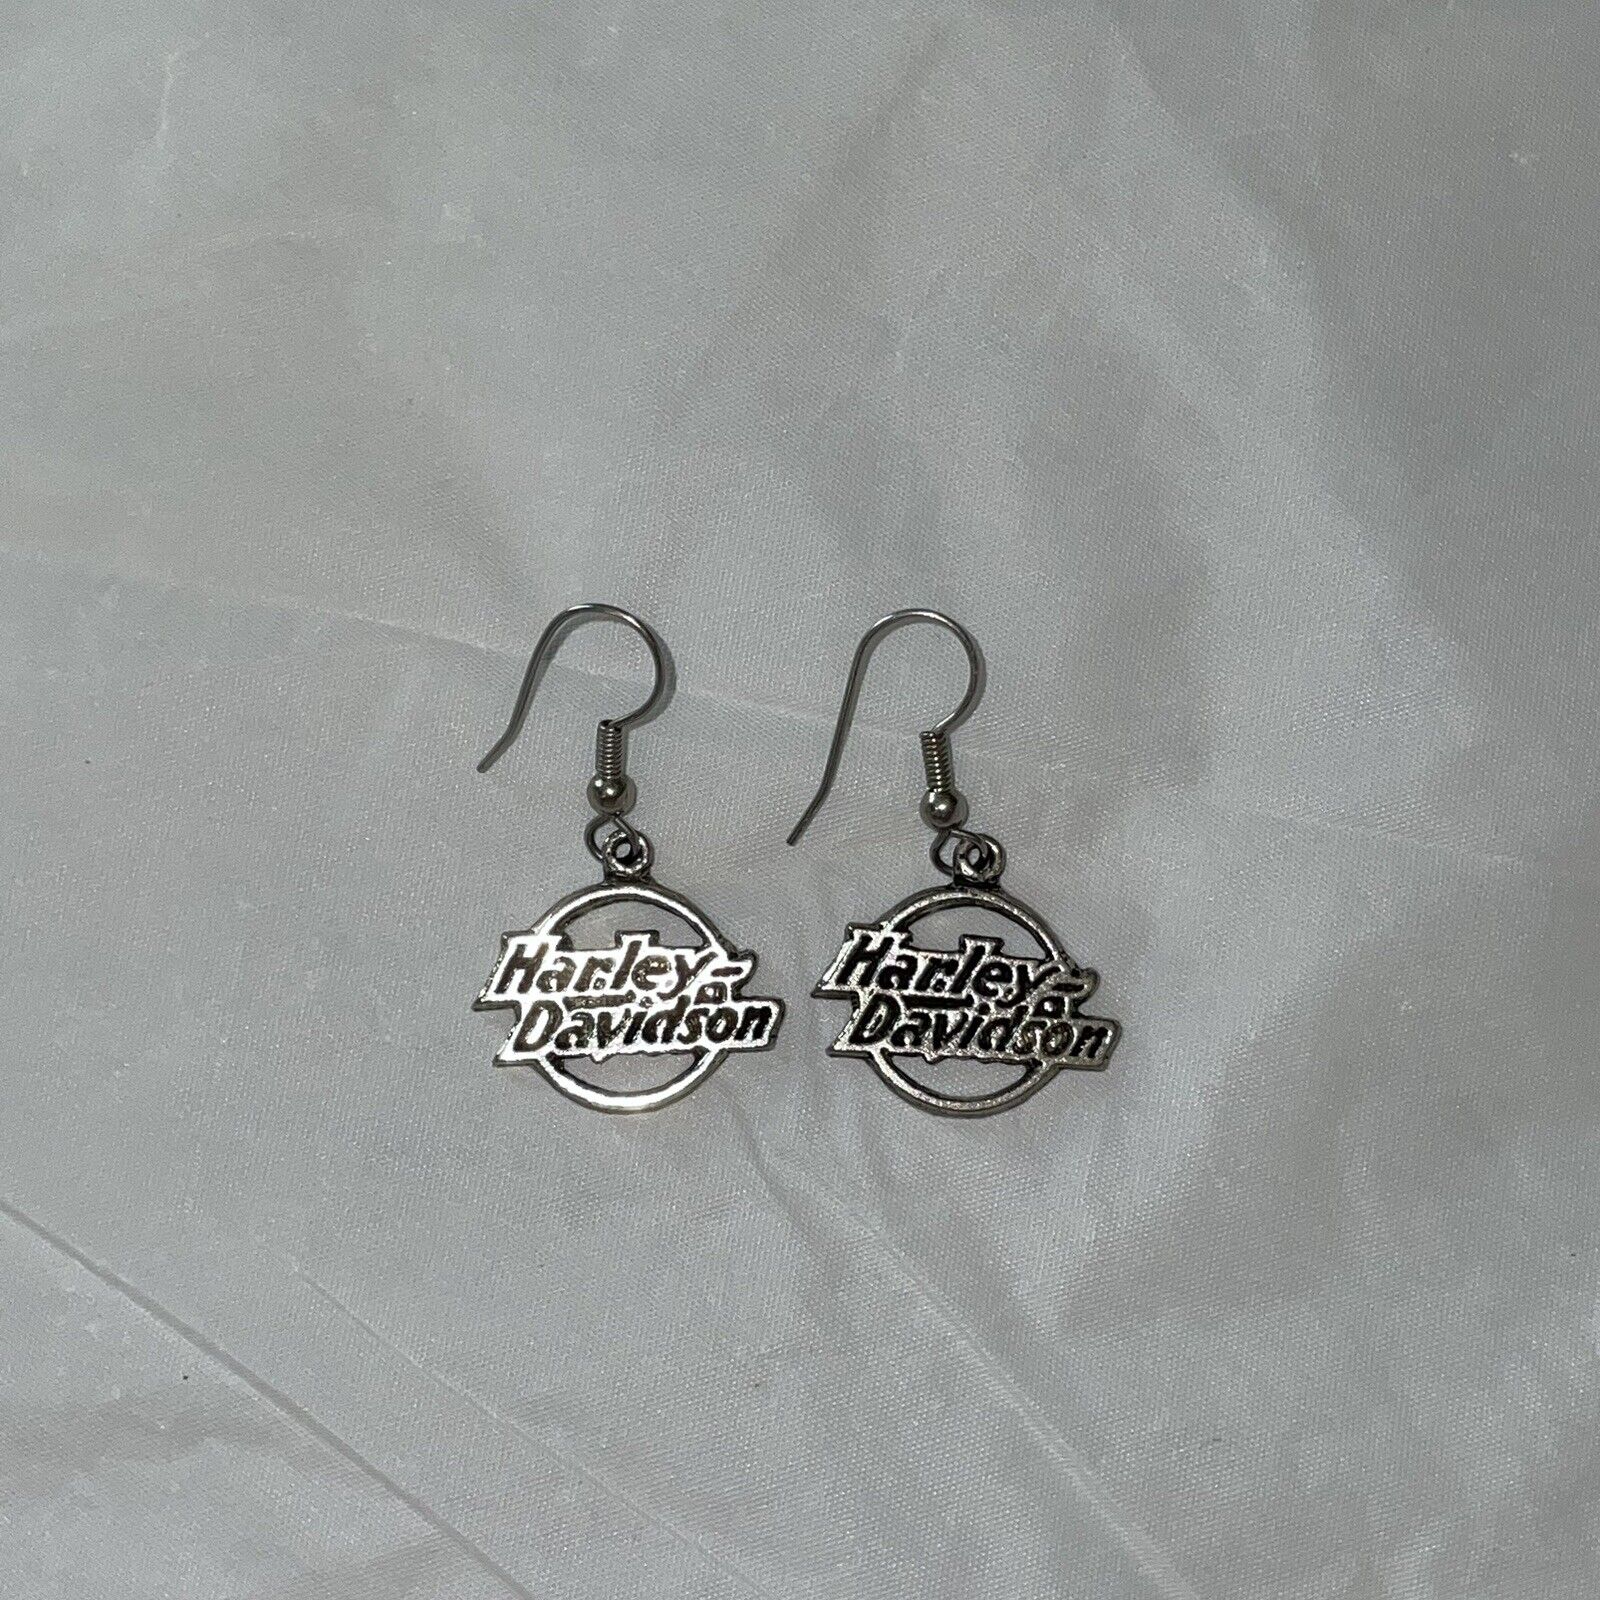 Vintage Harley Davidson Dangle Earrings Motorcycle Collectible Stainless Steel